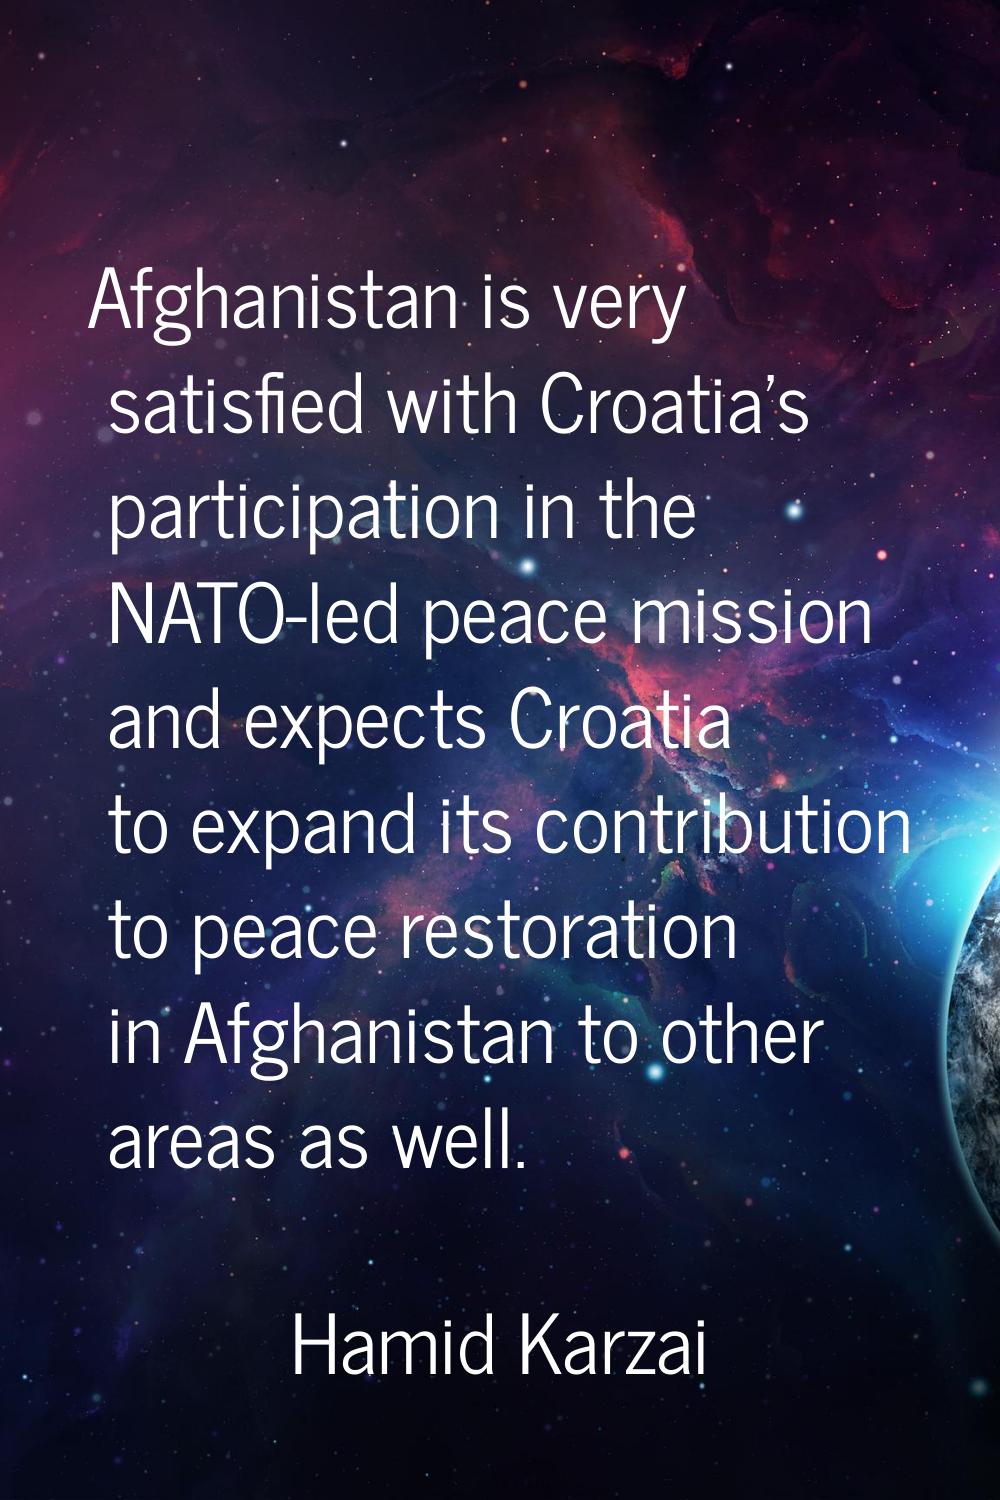 Afghanistan is very satisfied with Croatia's participation in the NATO-led peace mission and expect